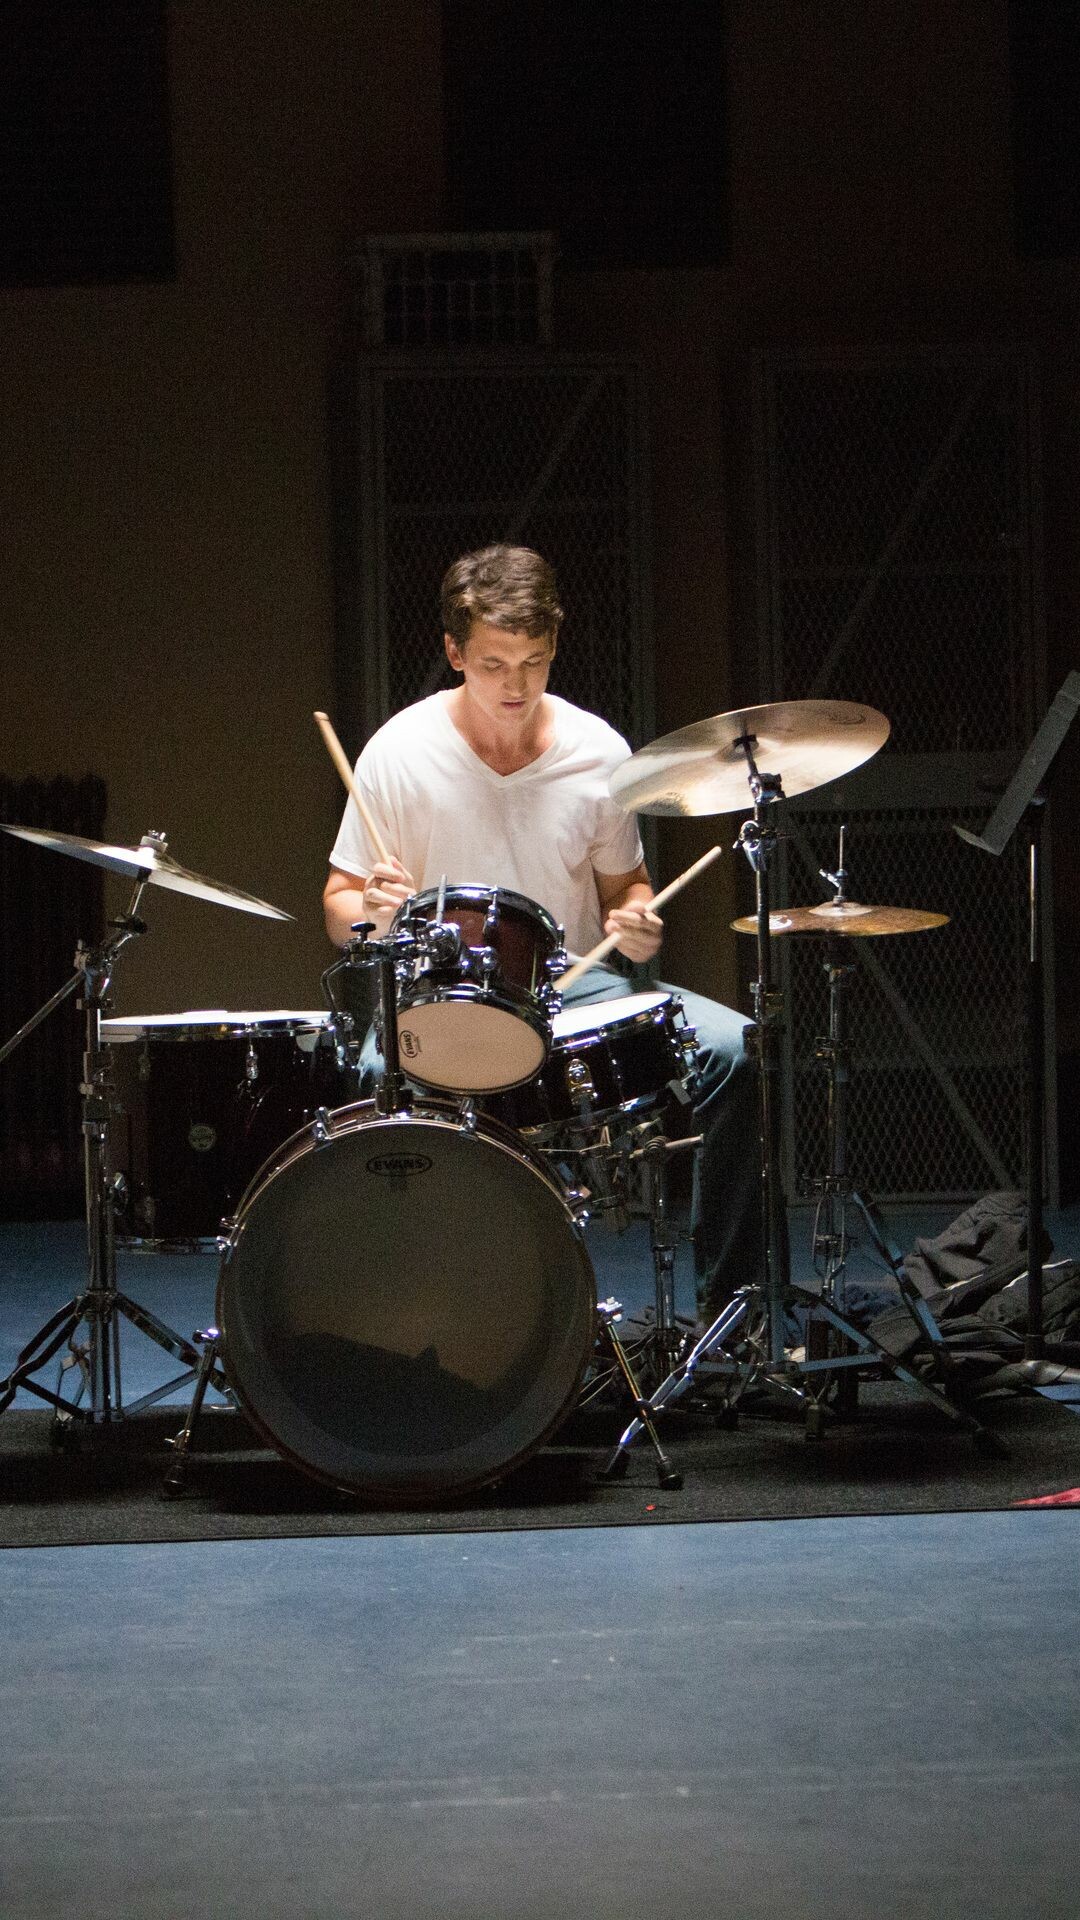 Whiplash: Miles Teller as Andrew Neiman, an ambitious young jazz drummer at Shaffer Conservatory. 1080x1920 Full HD Background.